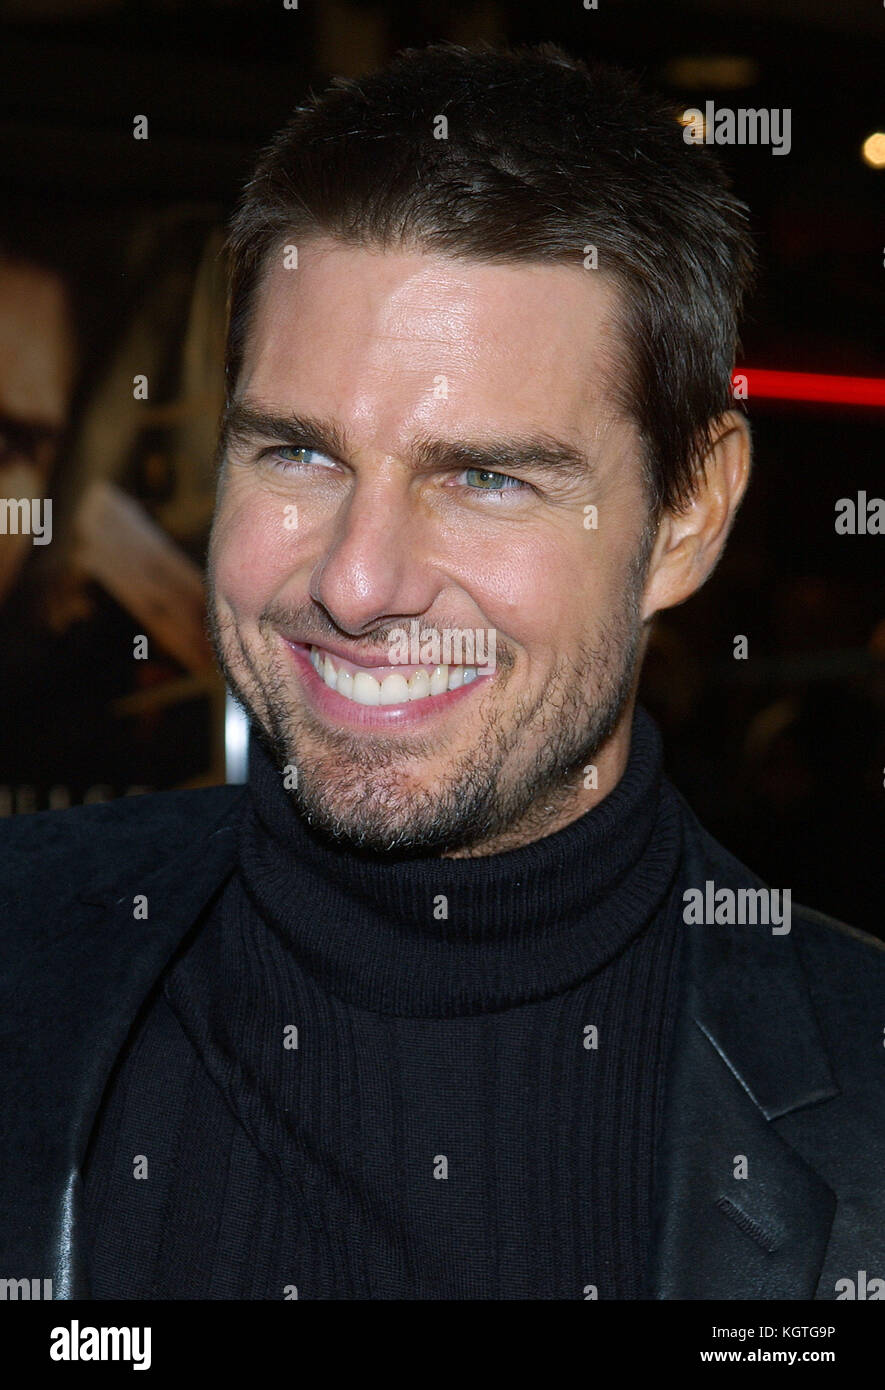 Tom Cruise arriving at the ' The Last Samurai Premiere ' at the Westwood Village in Los Angeles. December 1, 2003.Tom Cruise = People, Headshot, Premiere, Awards show, Arrival, Red Carpet Event, Vertical, Smiling, Film Industry, USA, Movie actor, movie celebrity, Artist, Celebrity, Looking At Camera, Photography, Arts Culture and Entertainment, Attending an event, Bestof, One Person Stock Photo